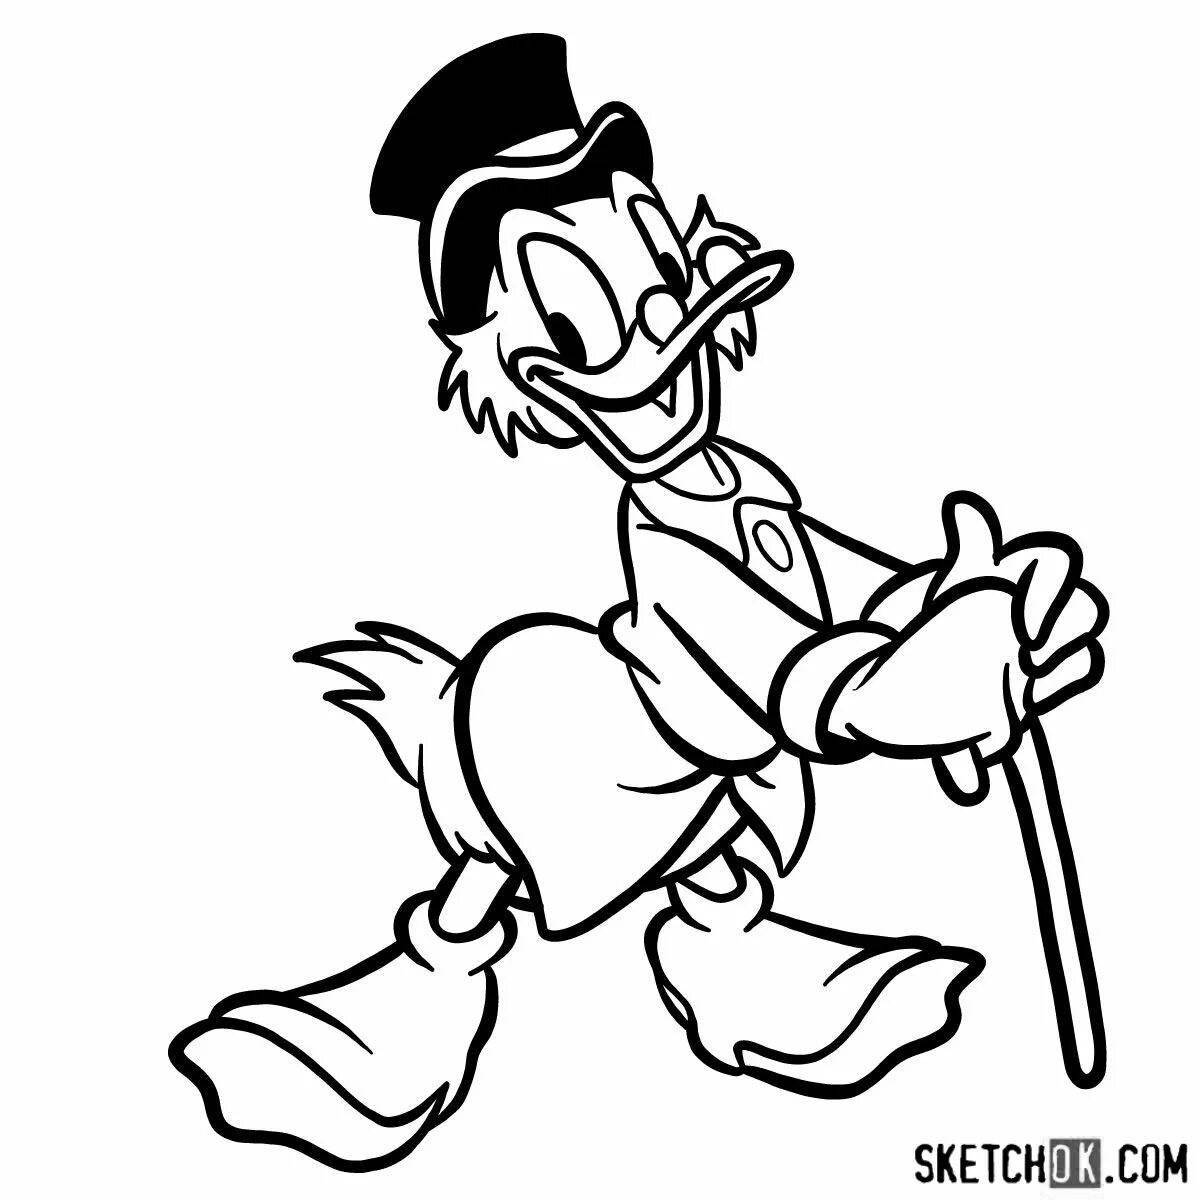 Coloring page amazing twist mcduck